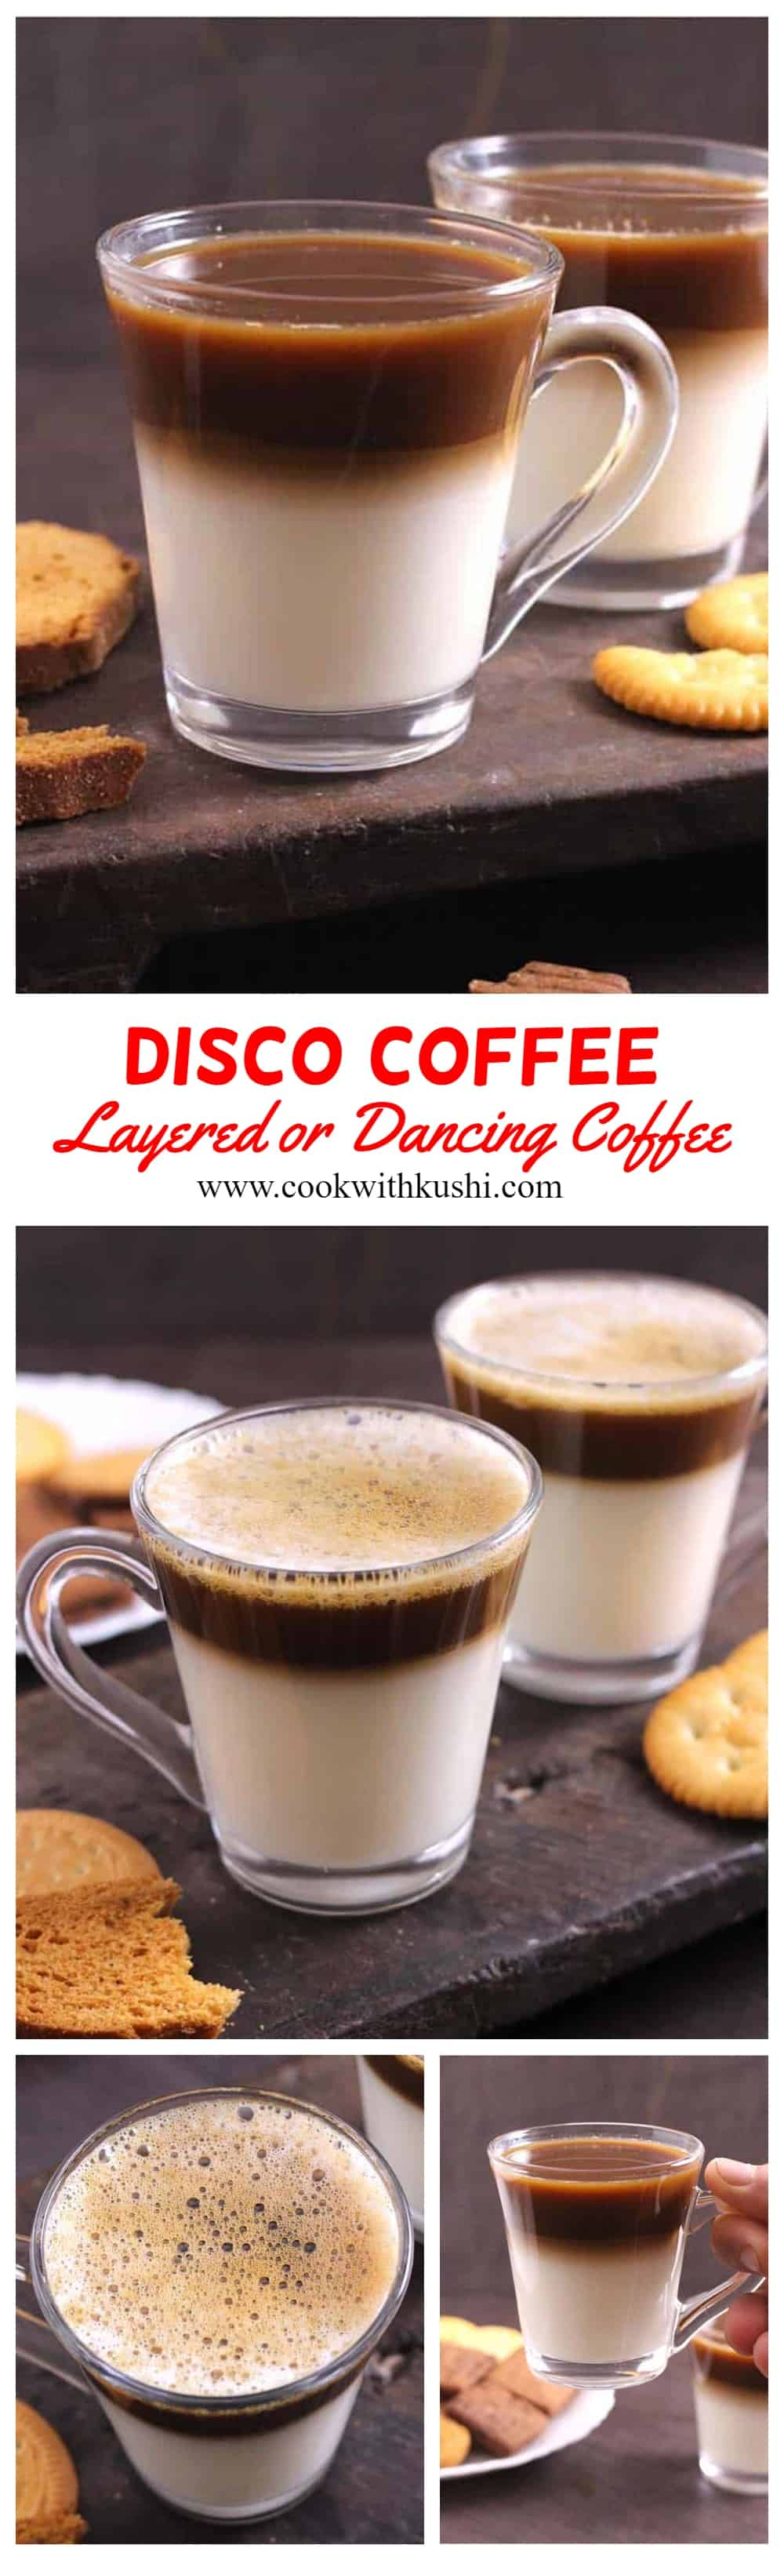 Disco Coffee, also known as dancing coffee or layered coffee is a special and one of the most beautiful way of serving coffee. #coffee #frothycoffee #Layeredcoffee #latte #kt #indiancoffee #indiantea #romaticrecipes #espresso